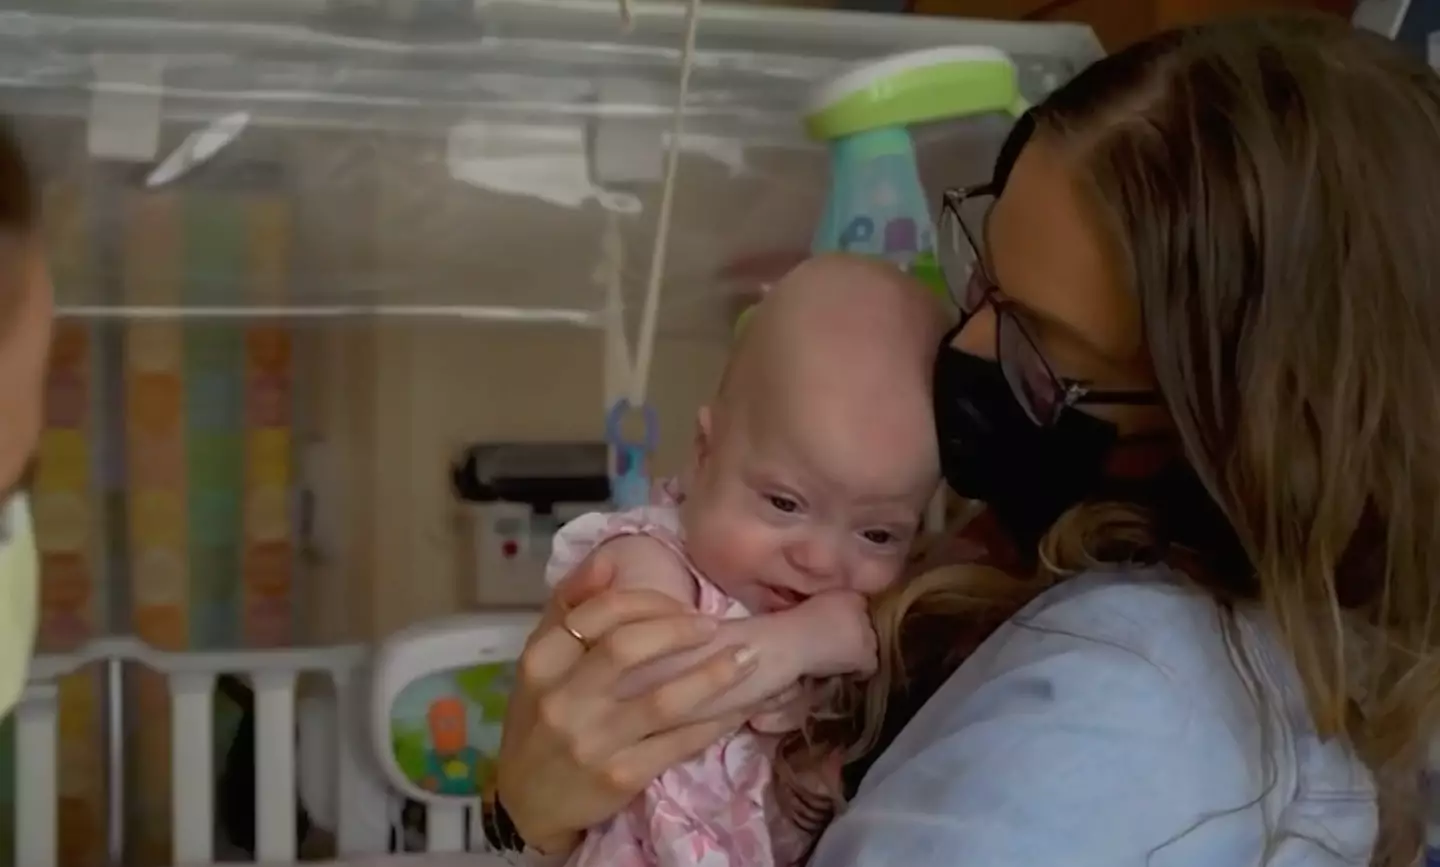 The family ended up taking Gracie to Blythedale Children’s Hospital, where Gracie was given feeding therapy.